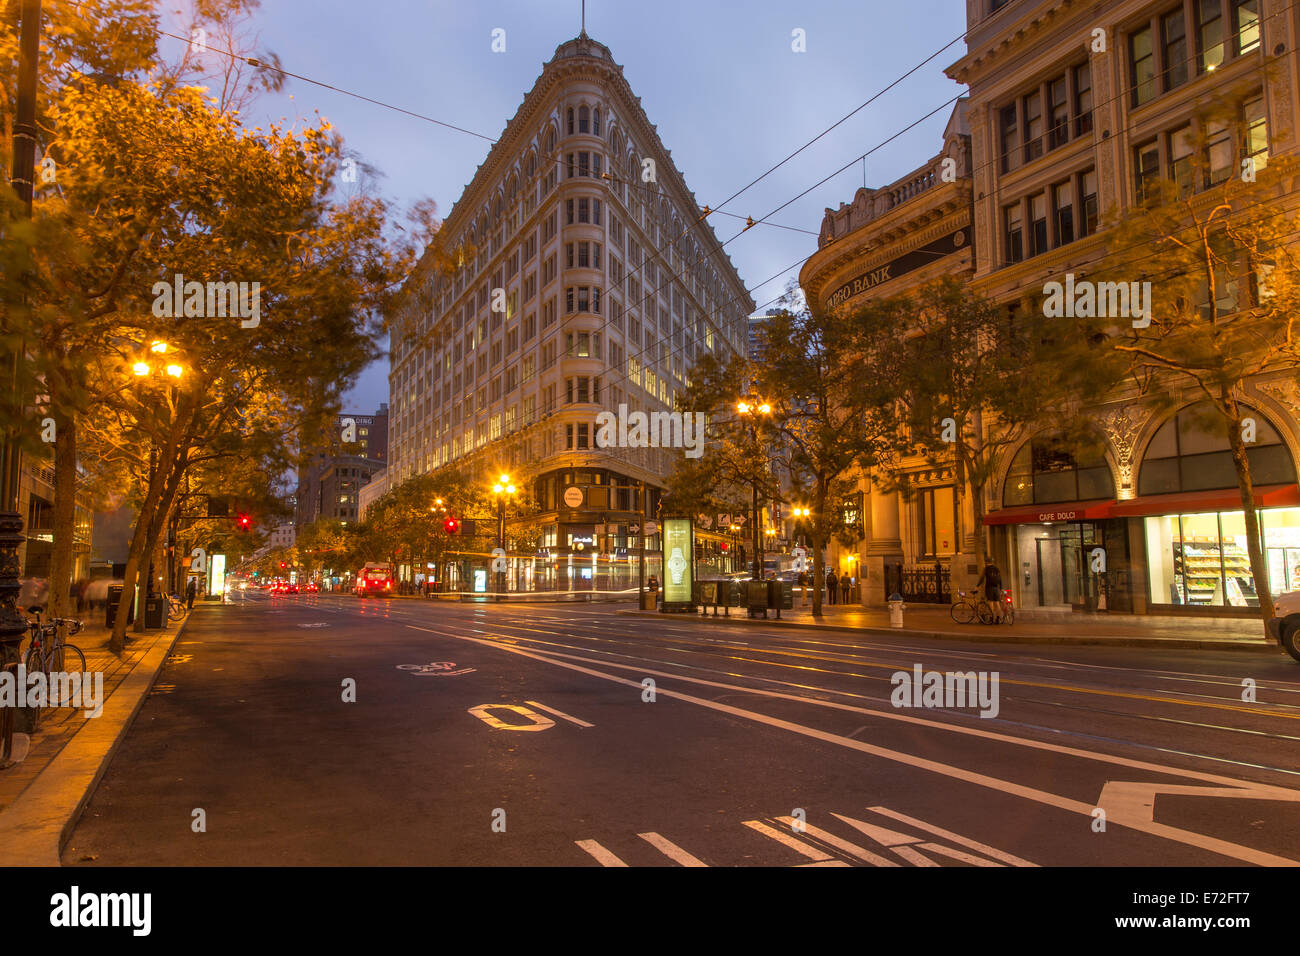 The Phelan building towers above Market and O Farrell streets in downtown San Francisco, California, USA. Stock Photo